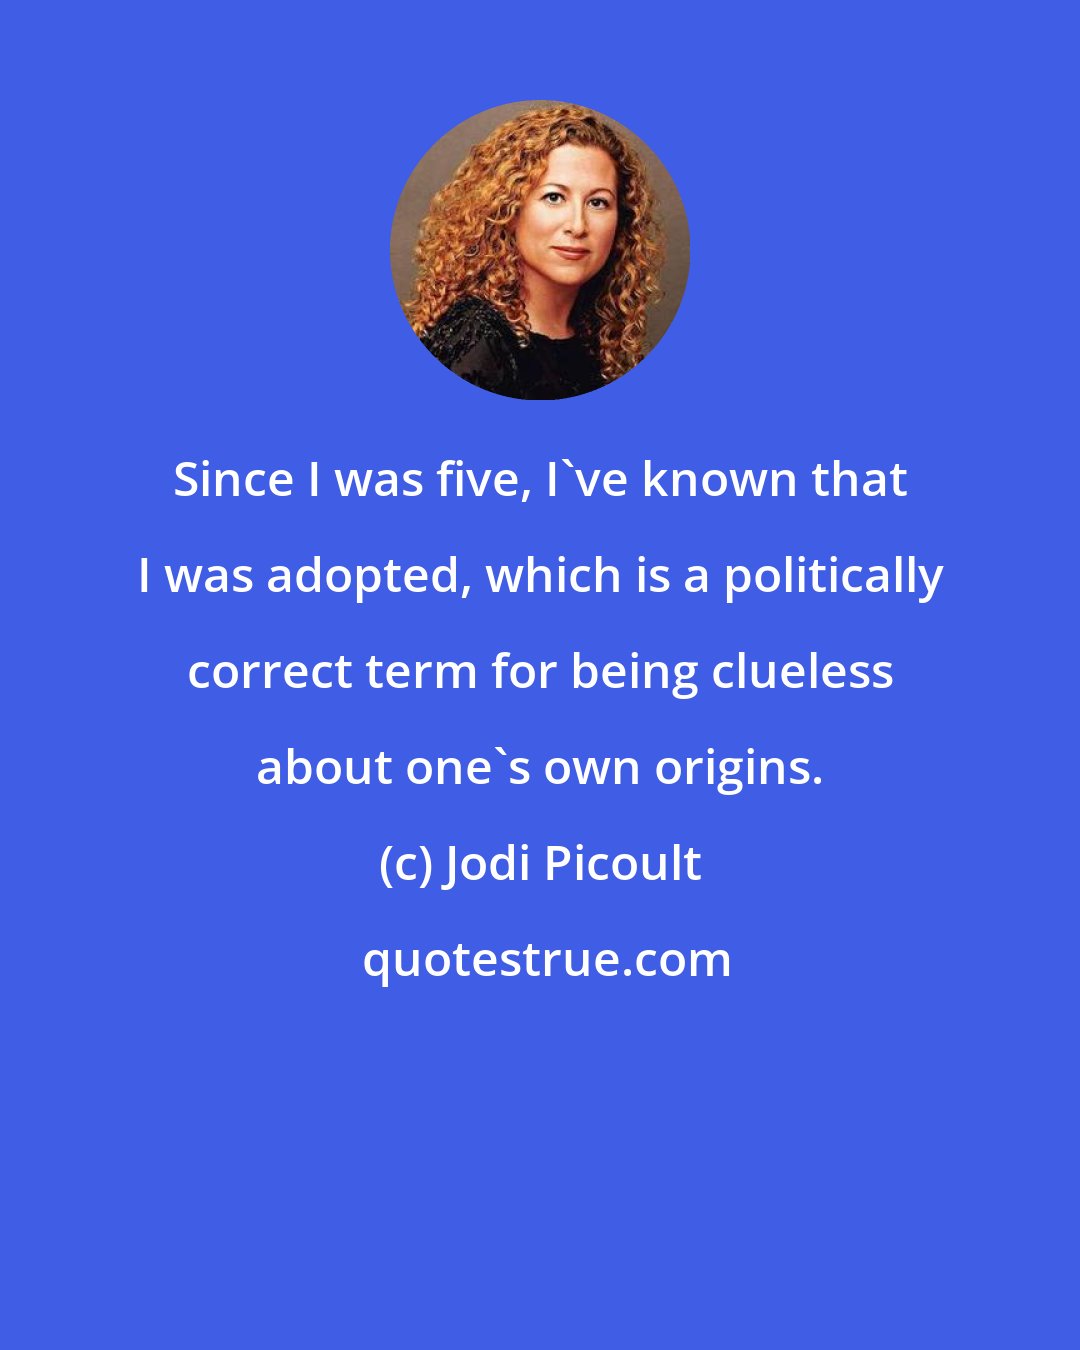 Jodi Picoult: Since I was five, I've known that I was adopted, which is a politically correct term for being clueless about one's own origins.